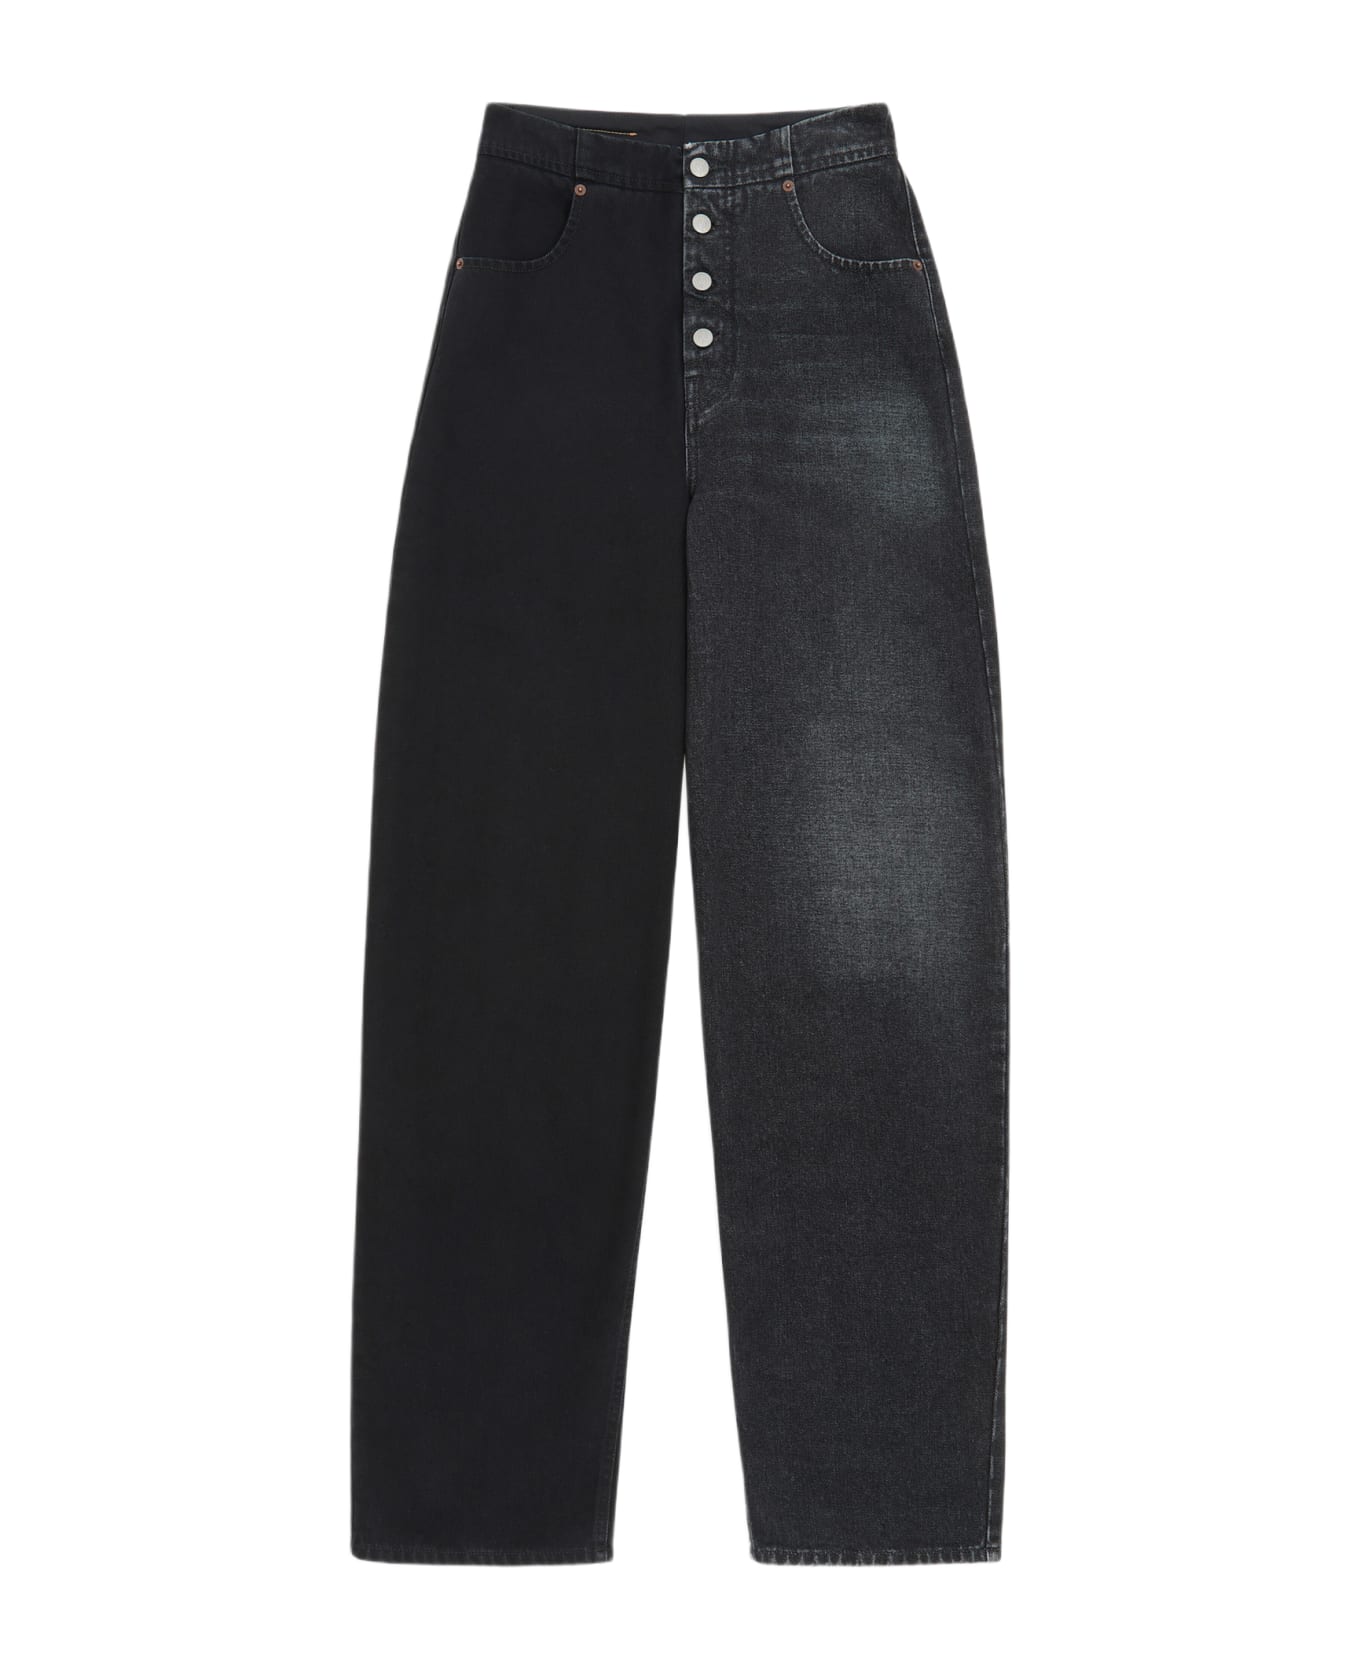 MM6 Maison Margiela Pantalone 5 Tasche Black and grey half and half baggy fit jeans - Denim nero ボトムス